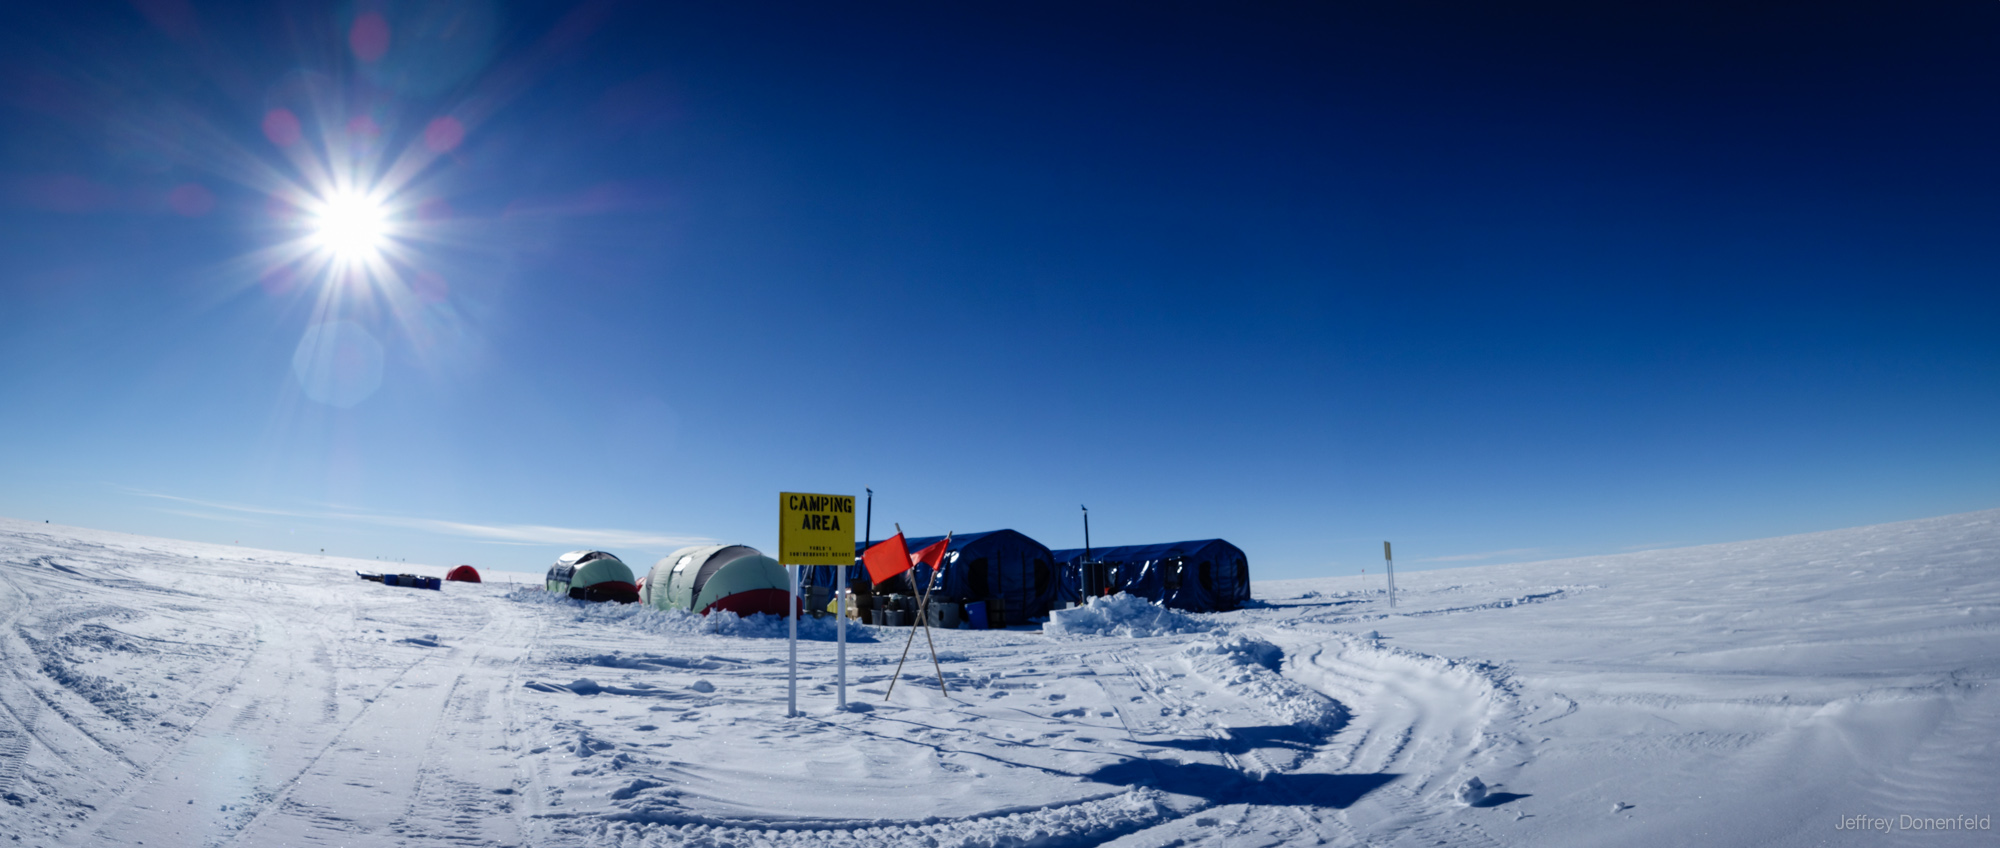 Adventure Network International Sets Up Camp At The South Pole